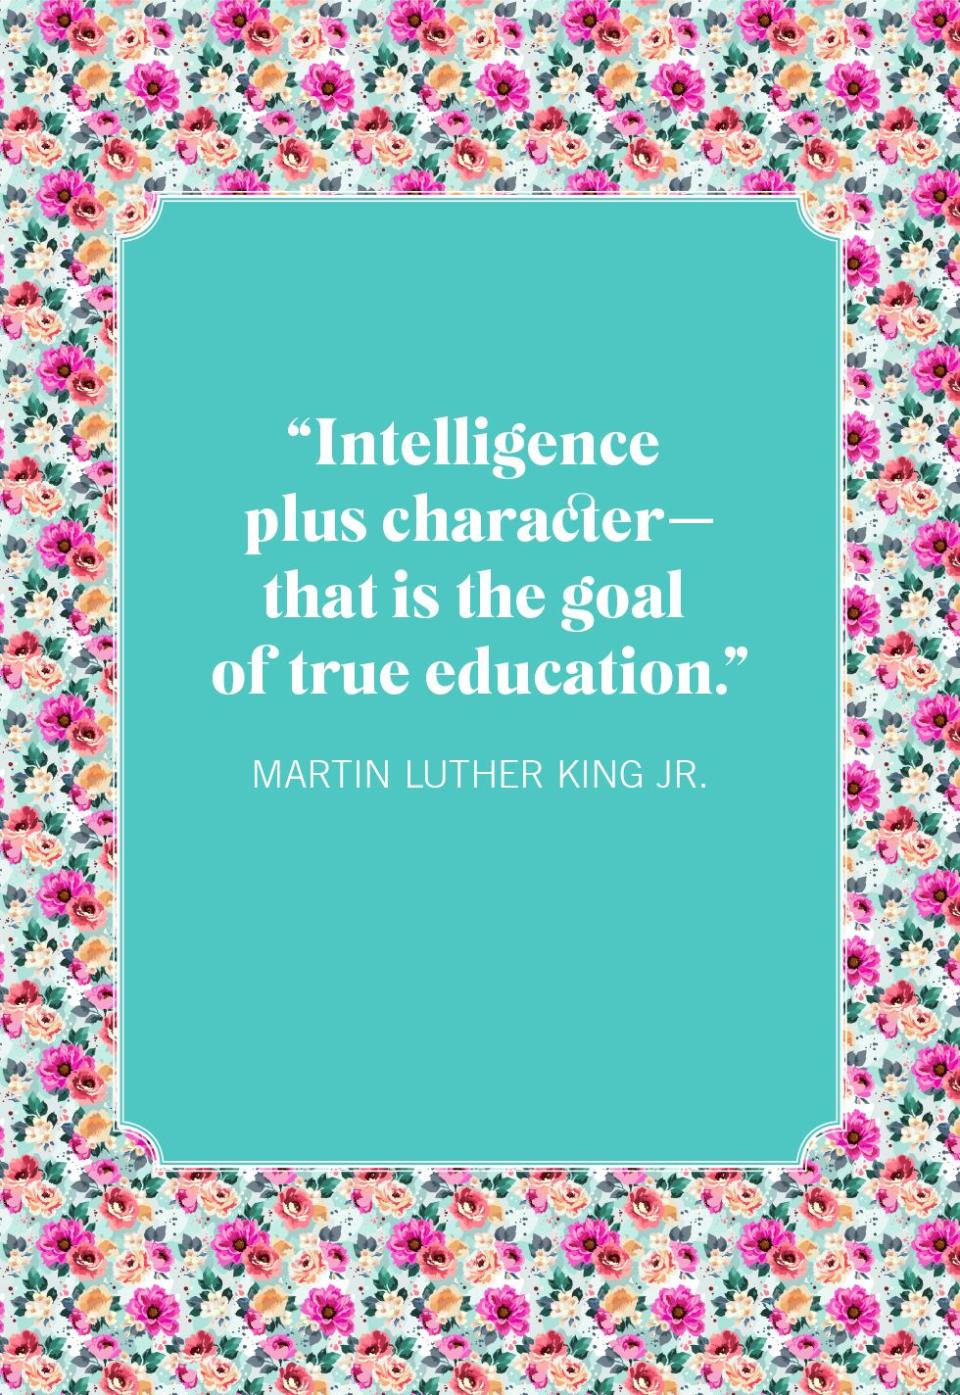 graduation quotes martin luther king jr